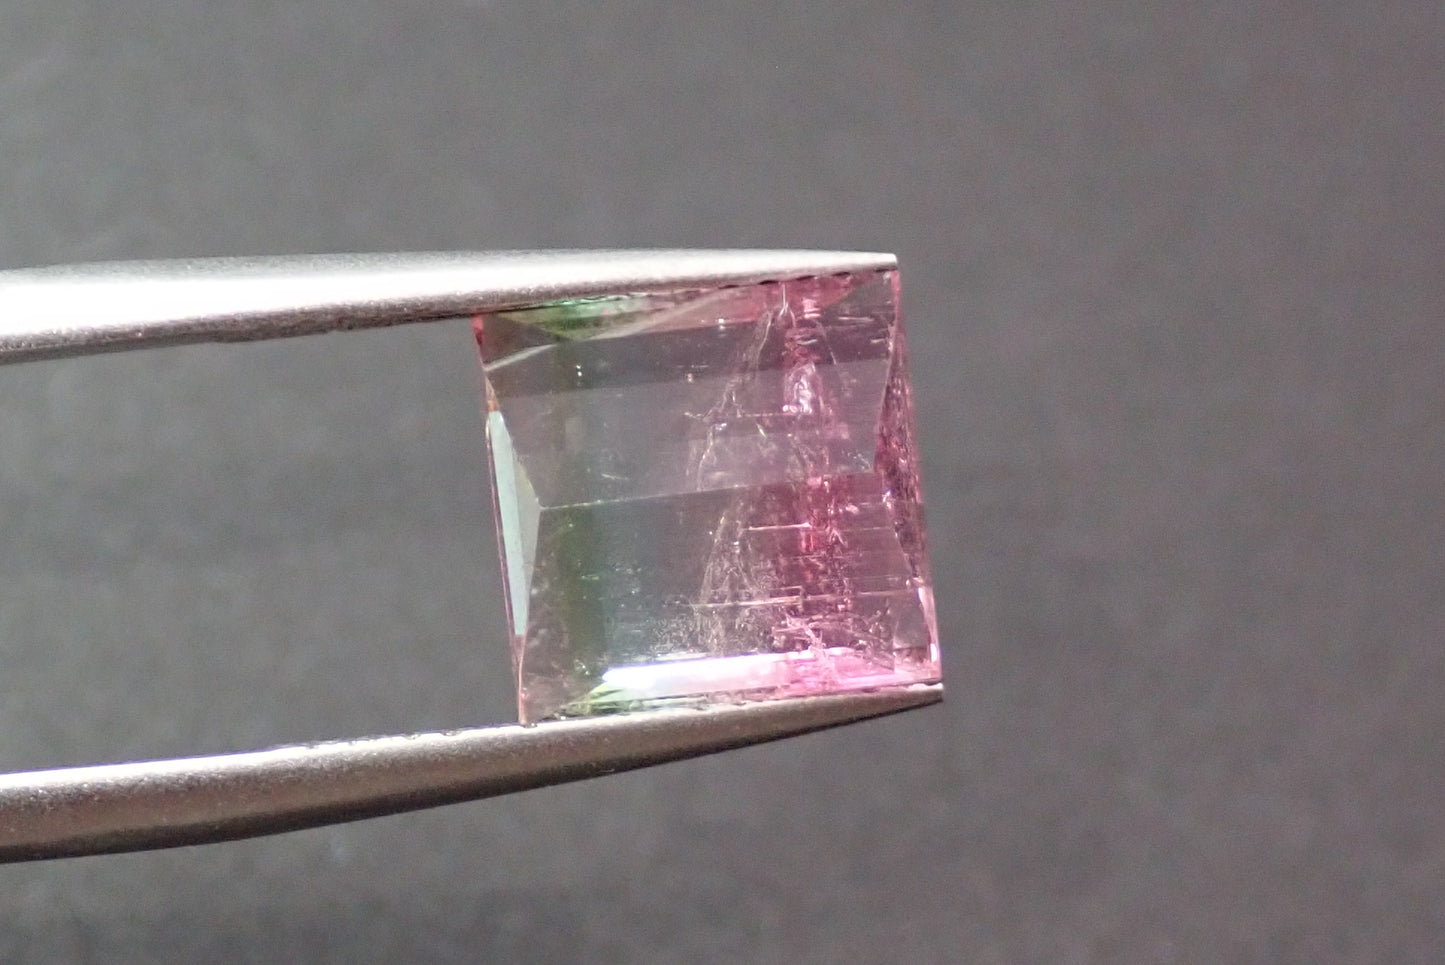 Party Colored Tourmaline 4.727ct